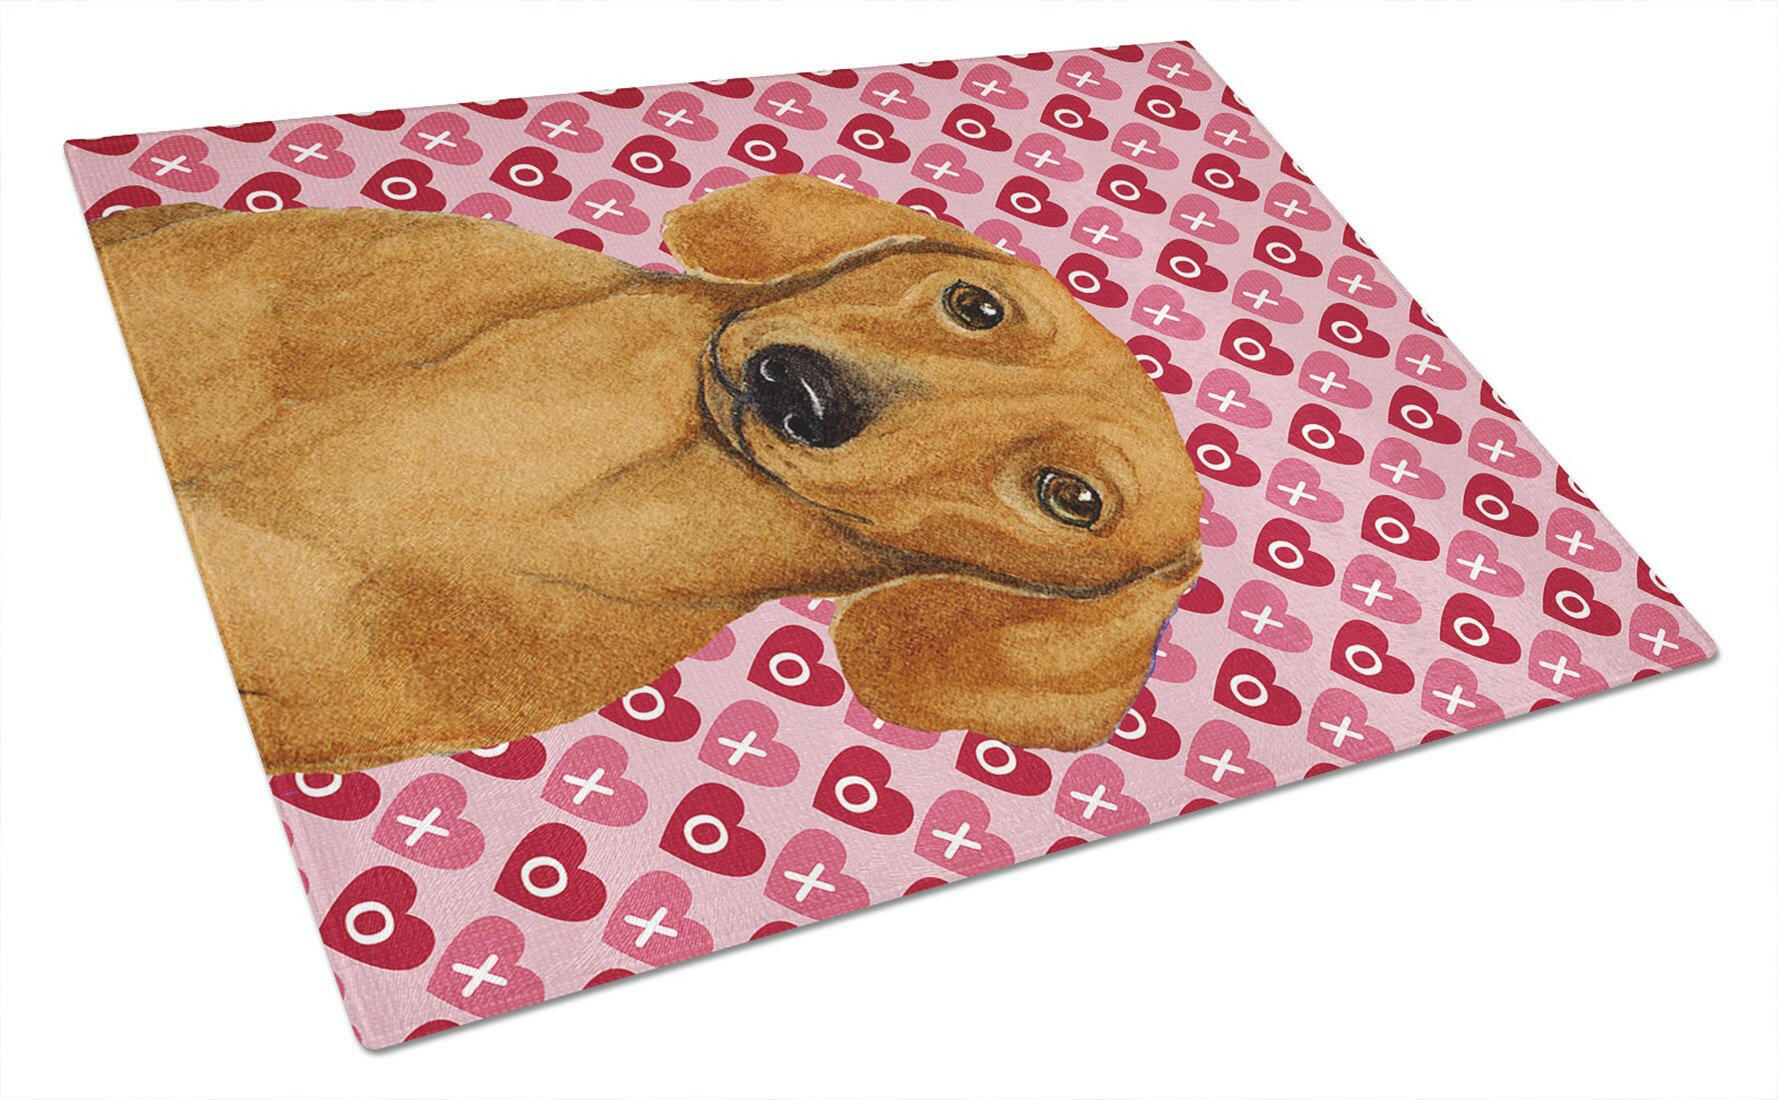 Dachshund Hearts Love and Valentine's Day Portrait Glass Cutting Board Large by Caroline's Treasures